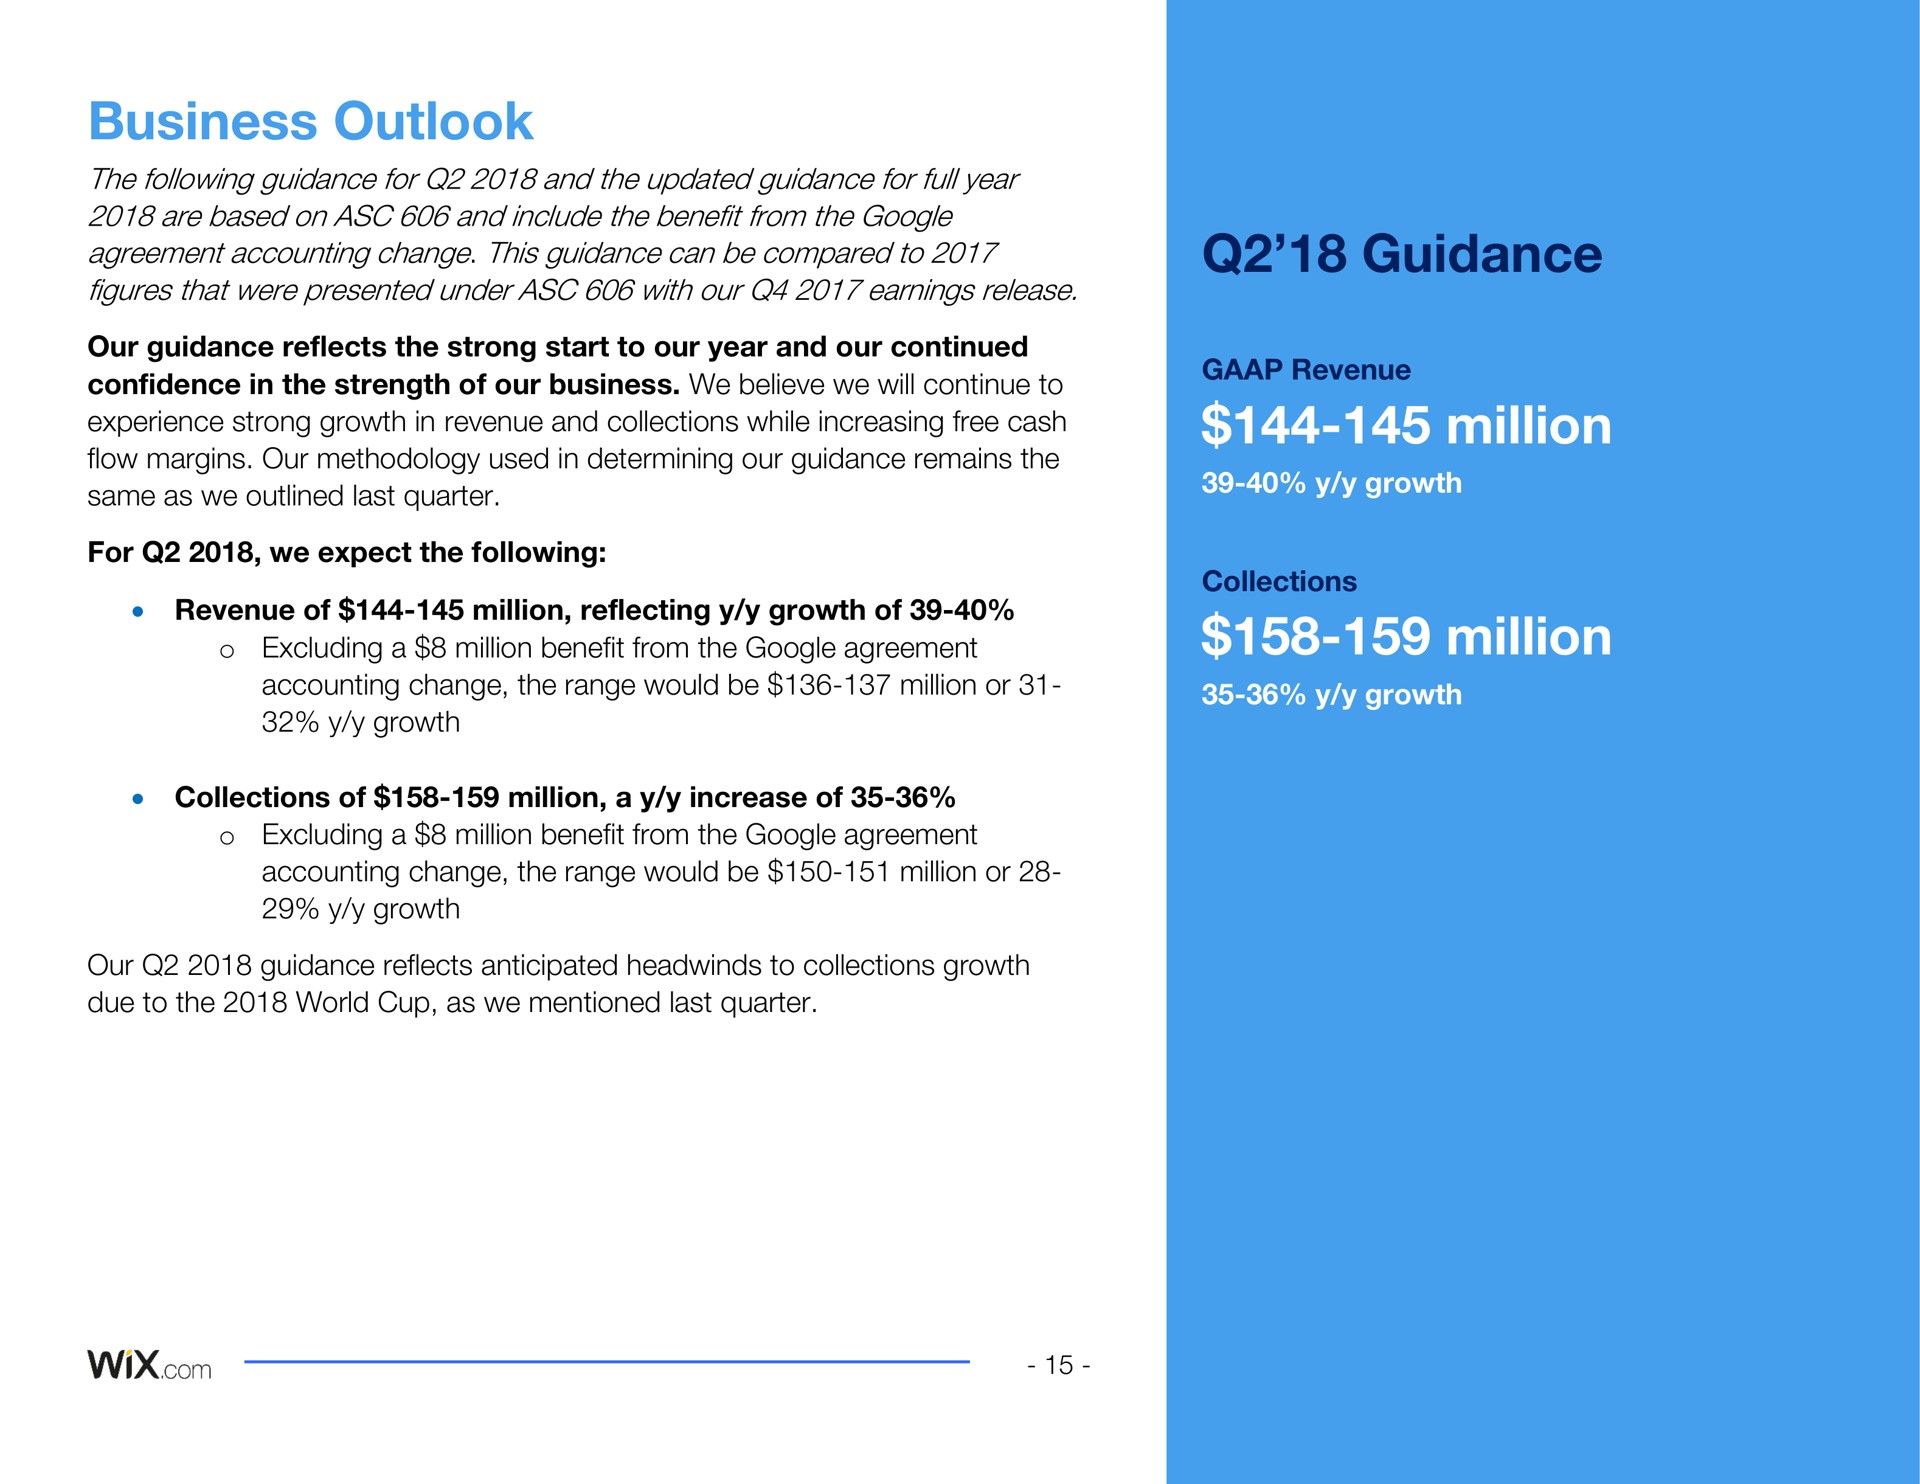 business outlook the following guidance for and the updated guidance for full year are based on and include the benefit from the agreement accounting change this guidance can be compared to figures that were presented under with our earnings release our guidance reflects the strong start to our year and our continued confidence in the strength of our business we believe we will continue to experience strong growth in revenue and collections while increasing free cash flow margins our methodology used in determining our guidance remains the same as we outlined last quarter for we expect the following revenue of million reflecting growth of excluding a million benefit from the agreement accounting change the range would be million or growth collections of million a increase of excluding a million benefit from the agreement accounting change the range would be million or growth our guidance reflects anticipated to collections growth due to the world cup as we mentioned last quarter guidance revenue million growth collections million growth | Wix